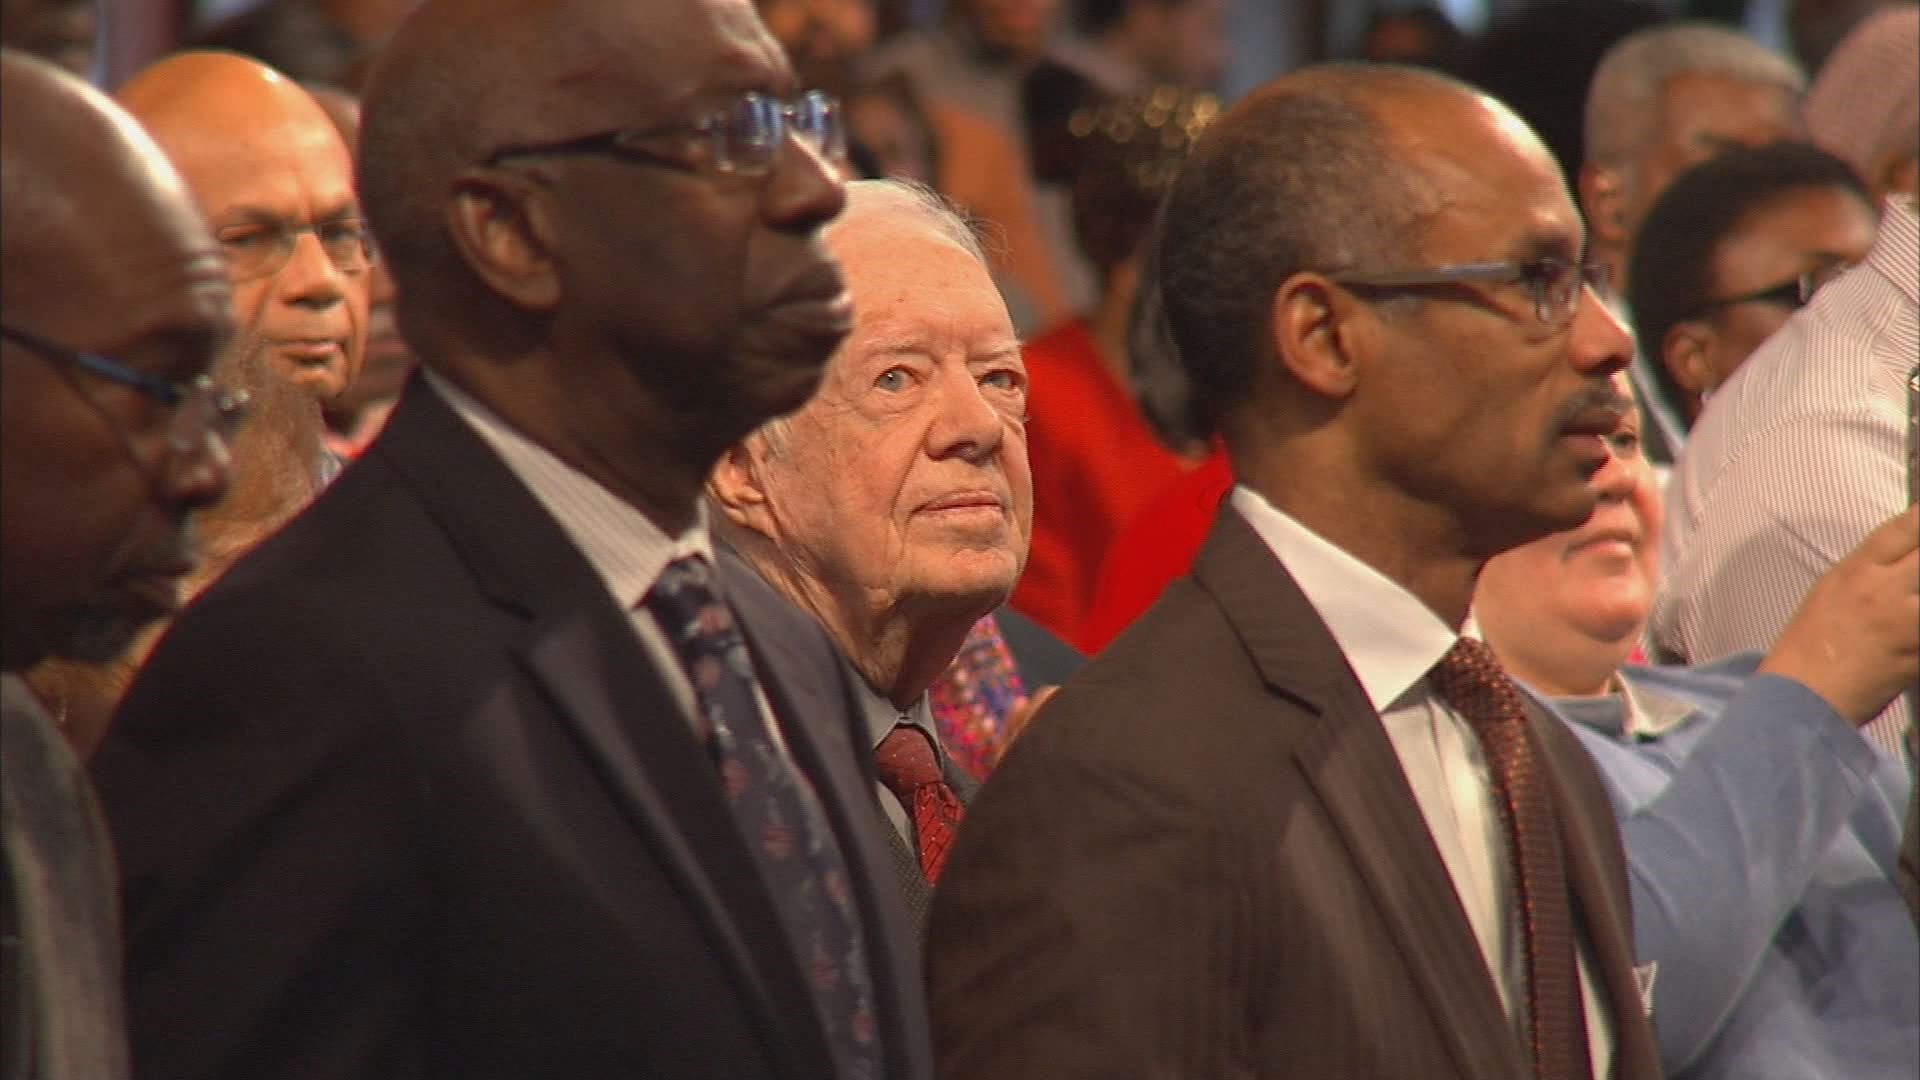 The former first family and many of their relatives were guests of honor at Atlanta's historic church on Sunday where Pastor Raphael Warnock welcomed them and told stories about their history with the church.